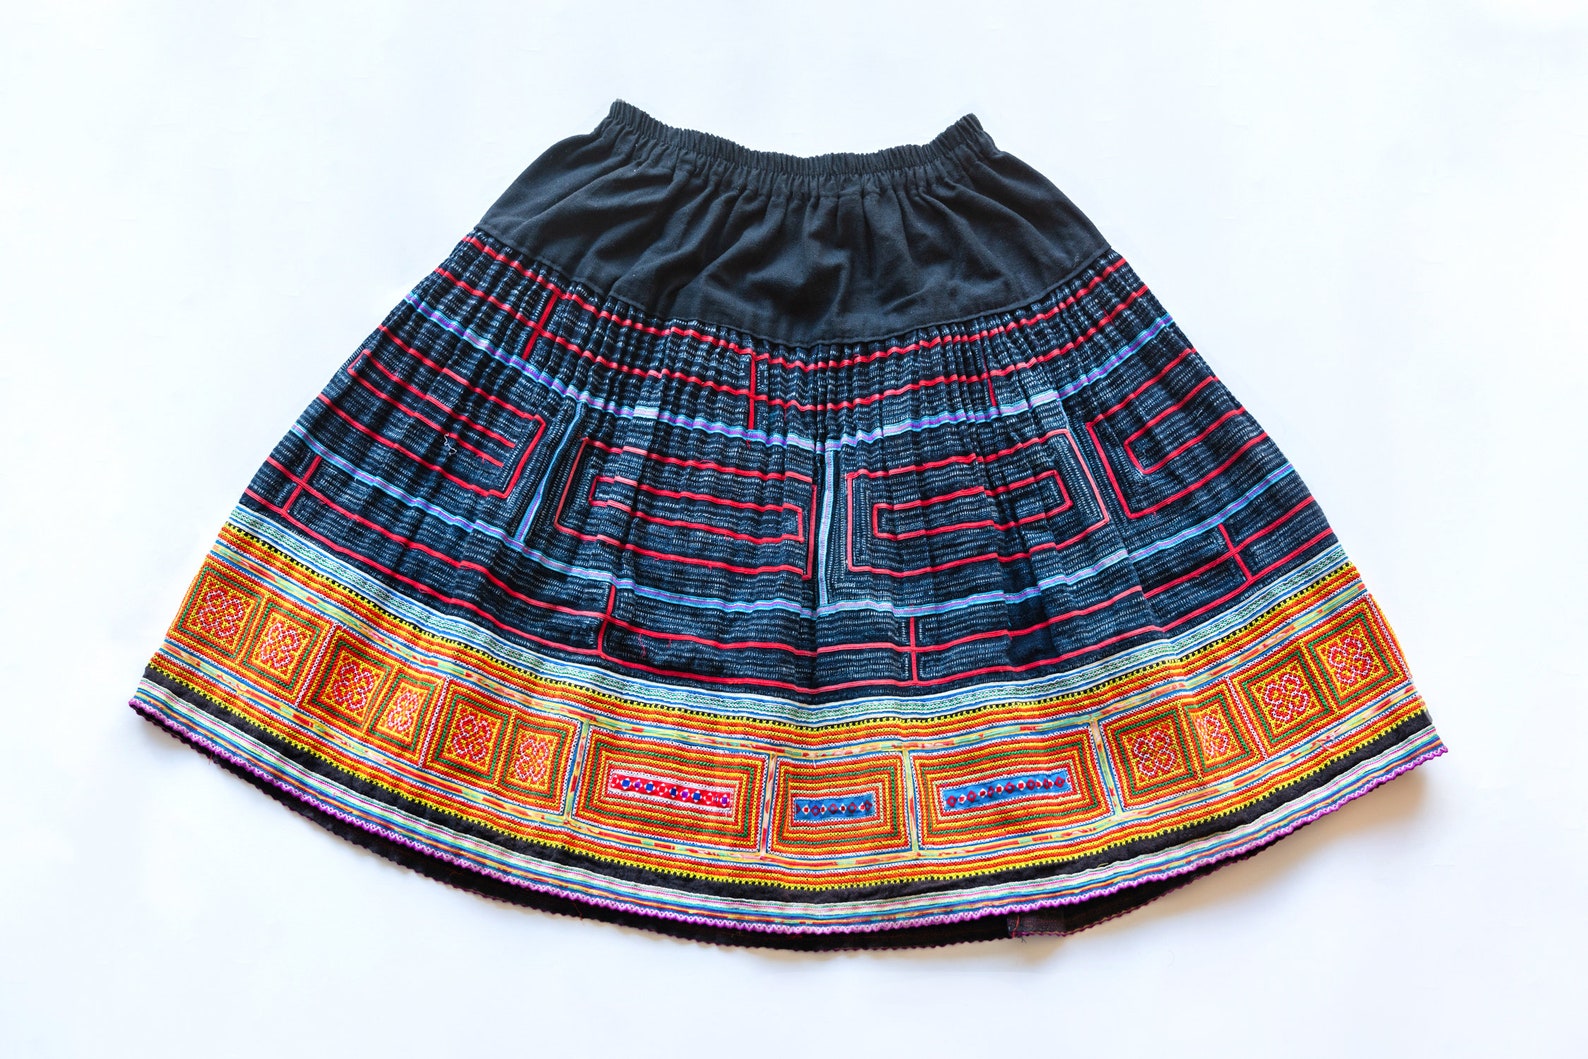 Vietnamese Hmong Cotton Skirt with Embroidery and Batik | Etsy